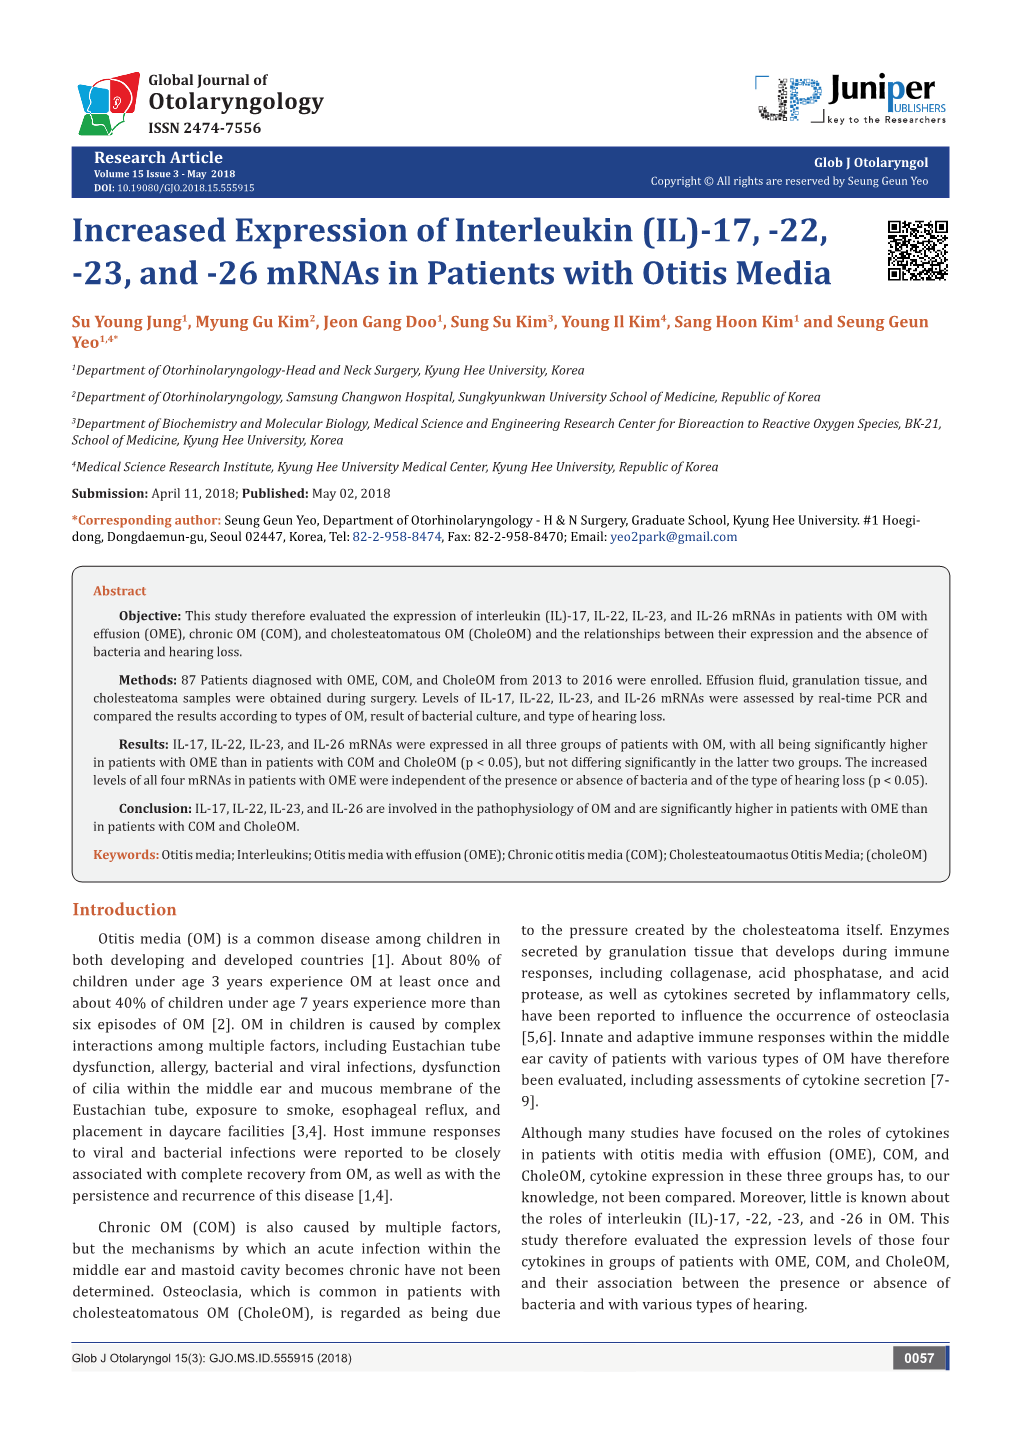 Increased Expression of Interleukin (IL)-17, -22, -23, and -26 Mrnas in Patients with Otitis Media